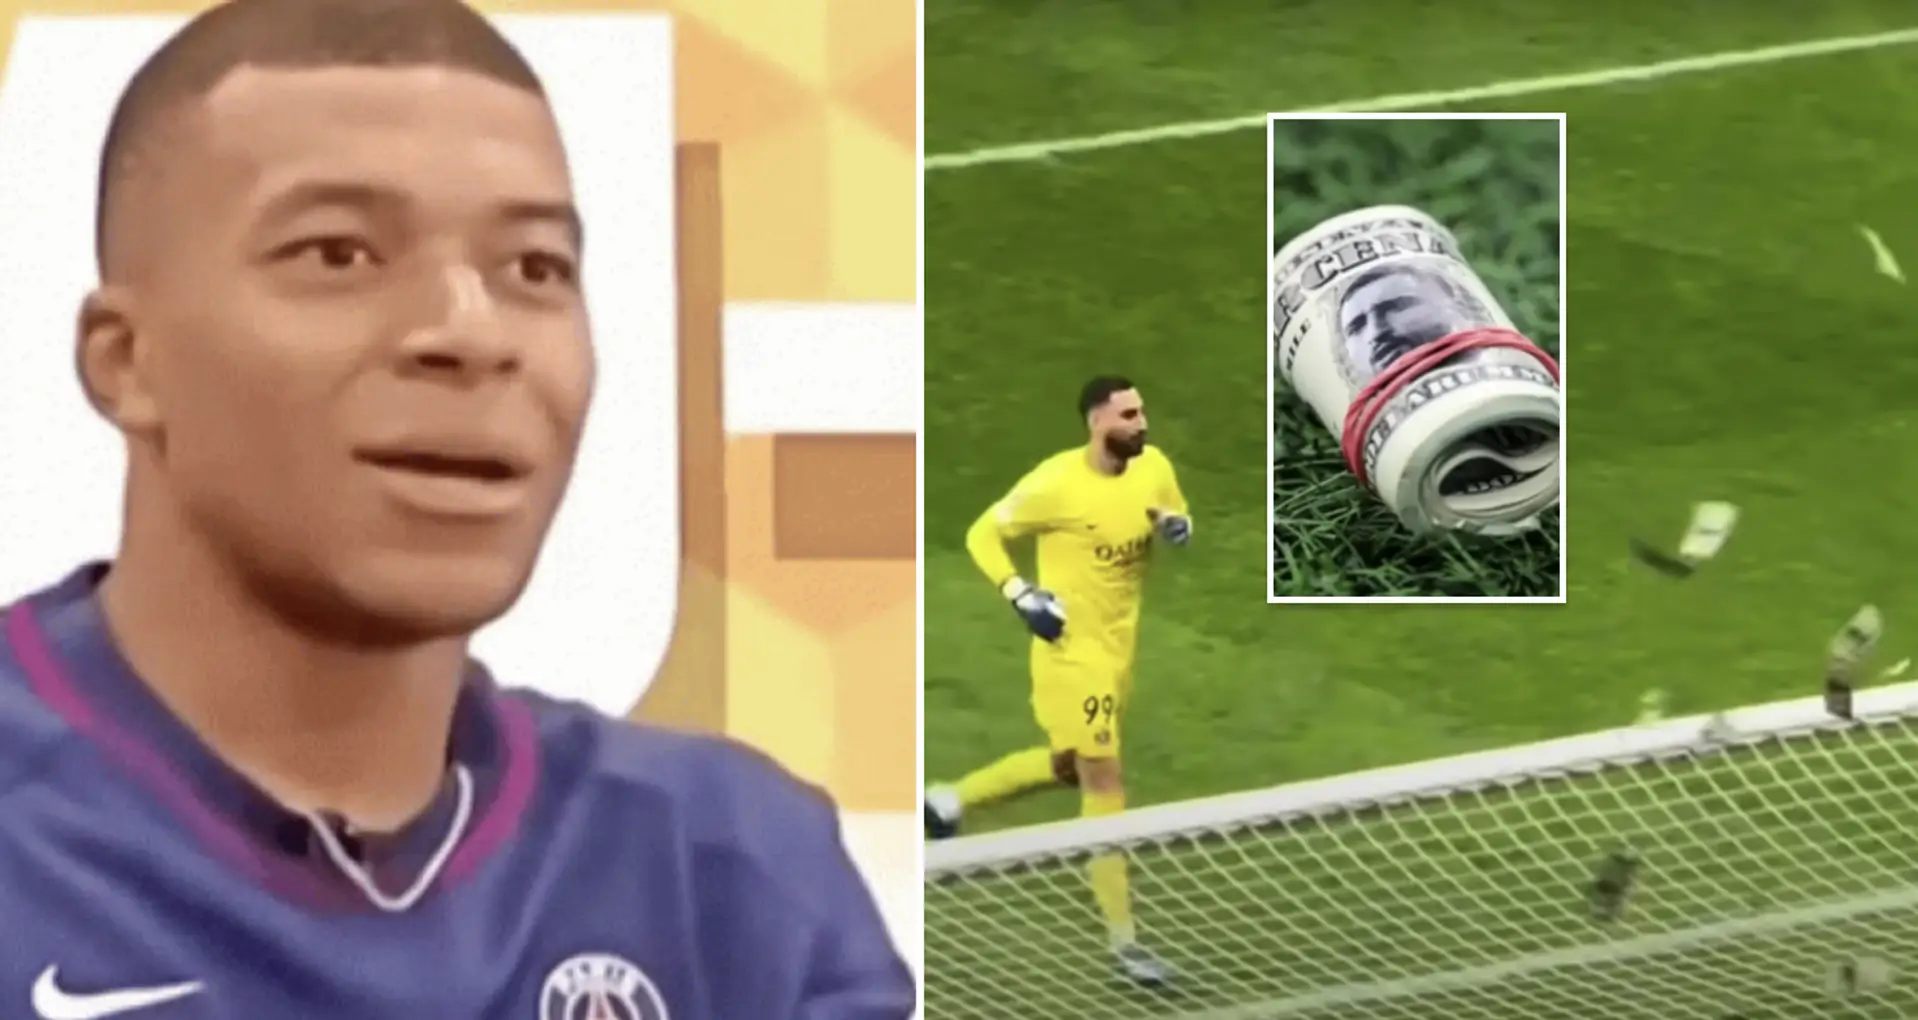 'Now we know how to welcome Mbappe at Bernabeu': Madridistas react as Donnarumma 'showered' with fake money at San Siro